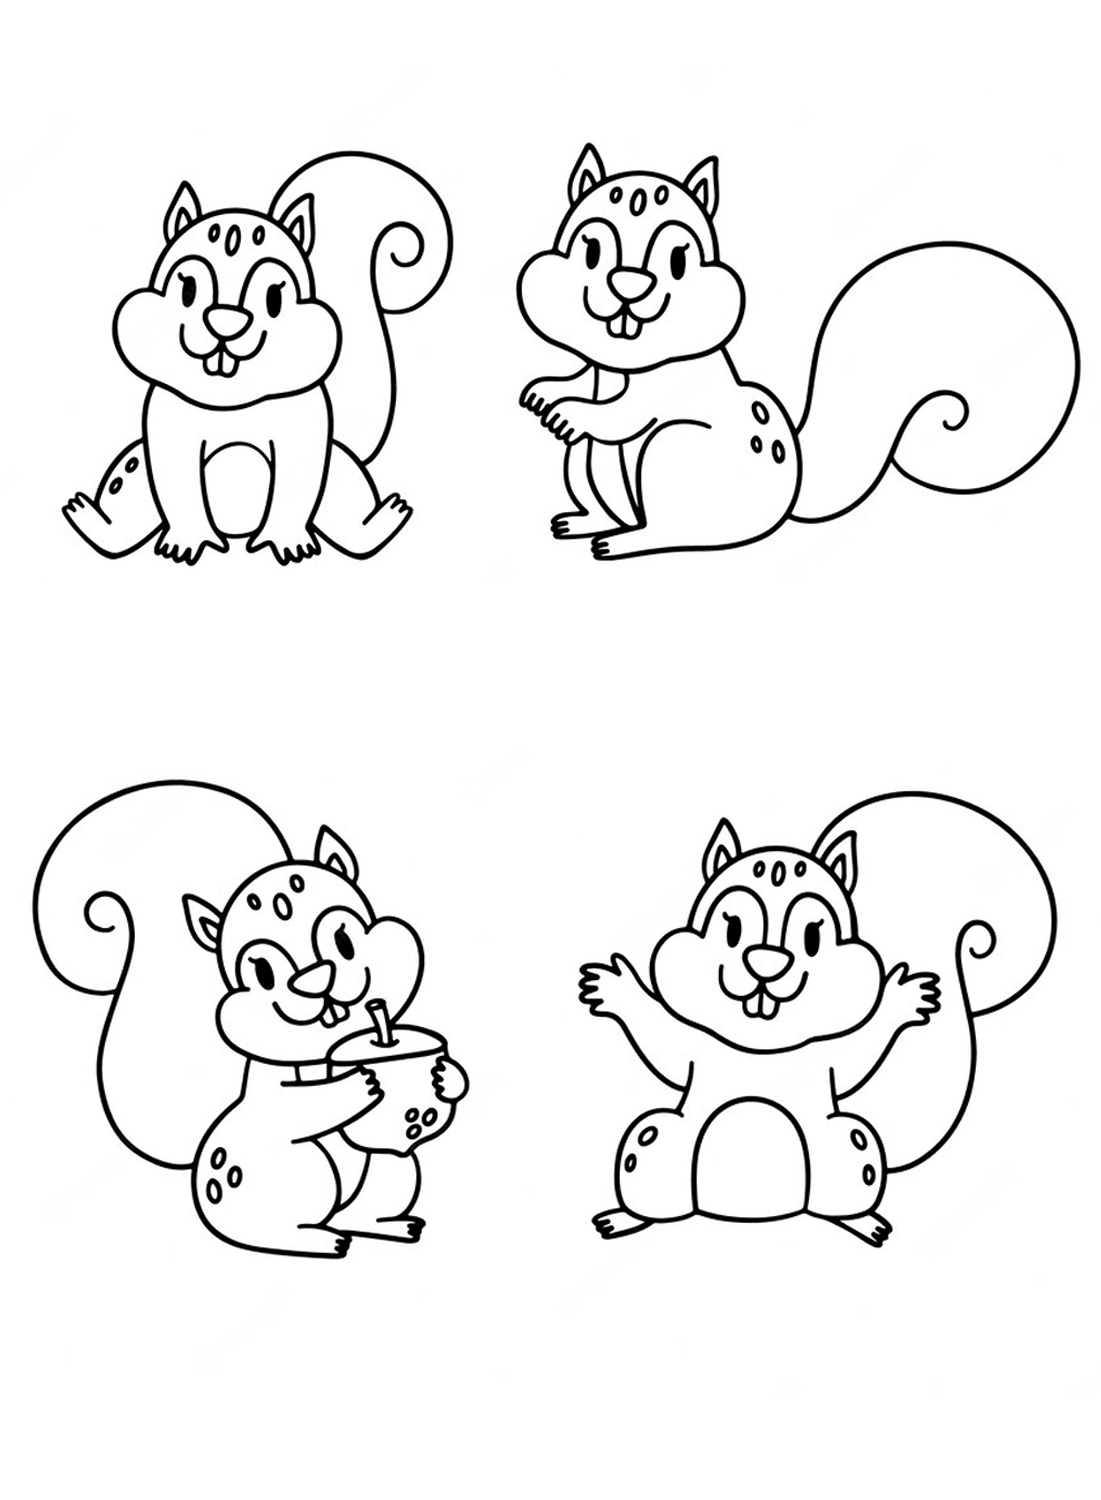 Coloring pages of squirrels from Squirrel